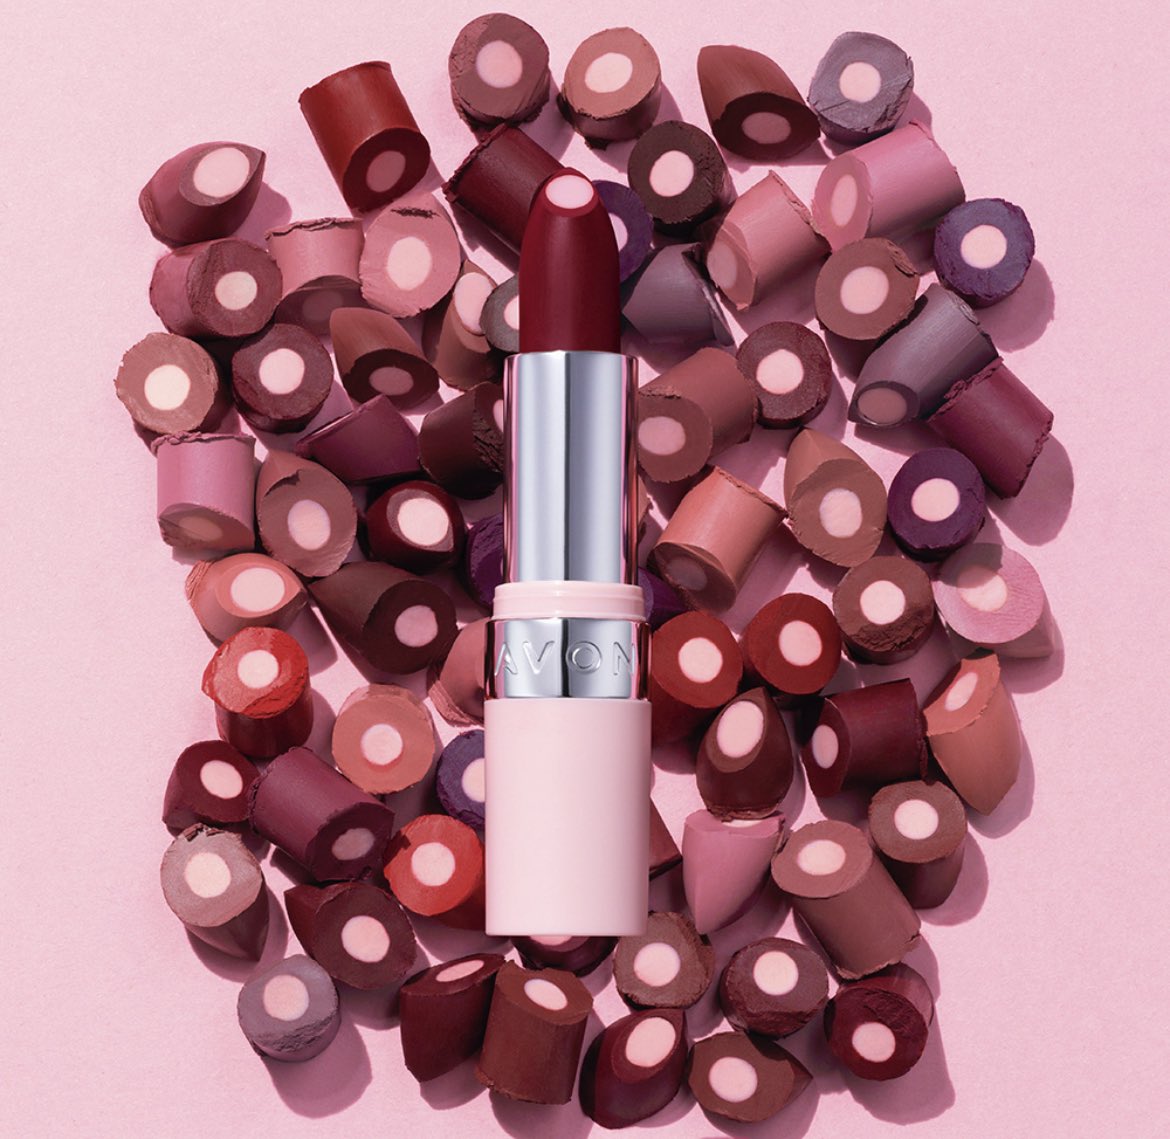 Matte lipstick with a hydrating hyaluronic core - what’s not to love ❤️ #HydramaticLipstick #AvonSA #ChooseAvon #TeamAvon